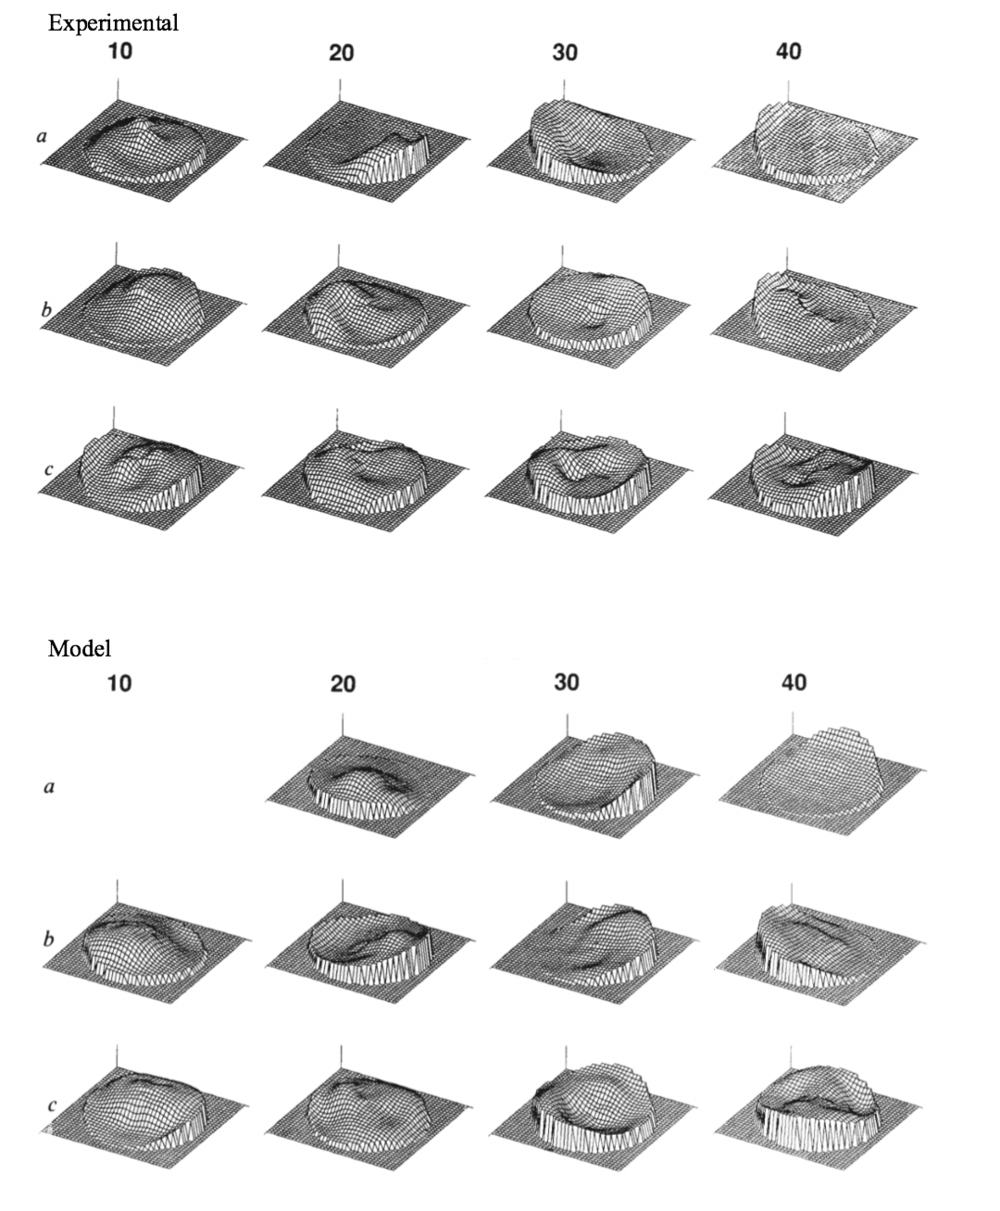  Figure B: comparison of experimental and model-derived receptive fields. Top: receptive field for various PPC neurons. Bottom: receptive fields various hidden layer units in the model. Modified from figure 2 and figure 5 of Zipser and Andersen (1988). To generate receptive fields, monkey fixated at a single point and was presented spot stimuli at various locations on the screen. The responses and a smooth surface was fit to the data points. 